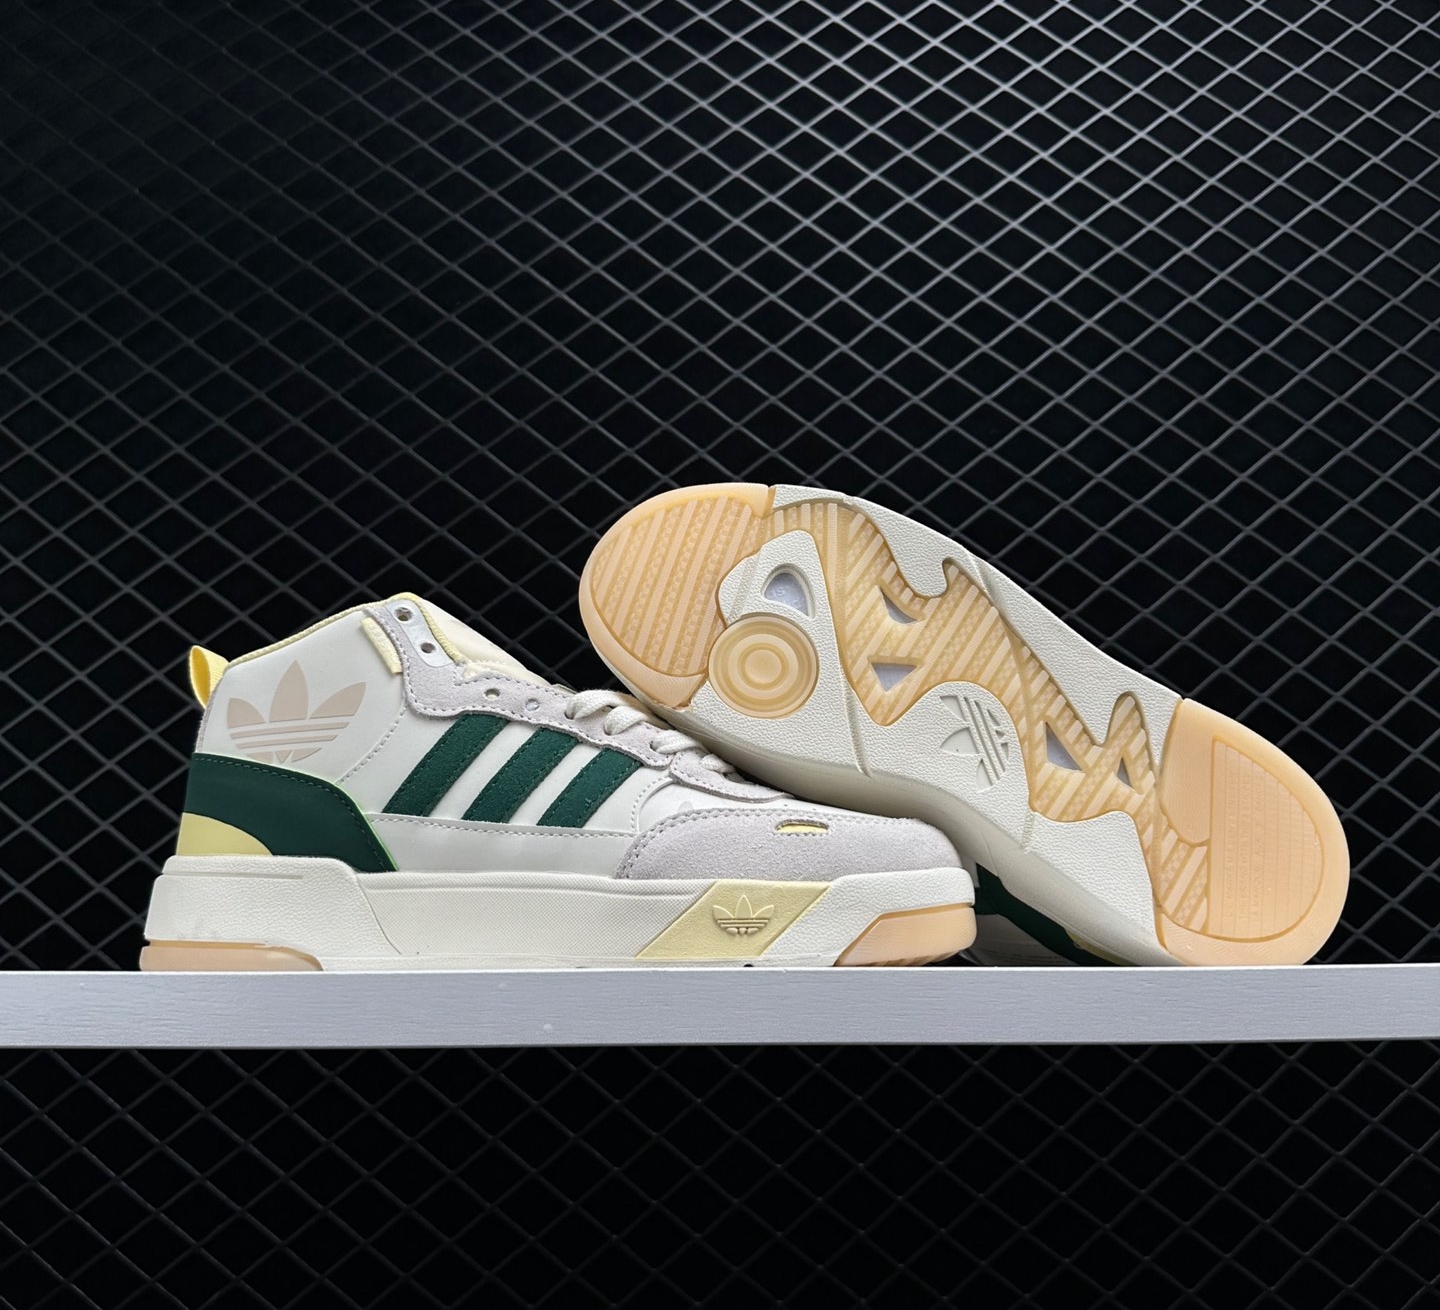 Adidas Originals Post Up WHITE GREEN YELLOW GV9318 - Stylish and Trendy Sneakers